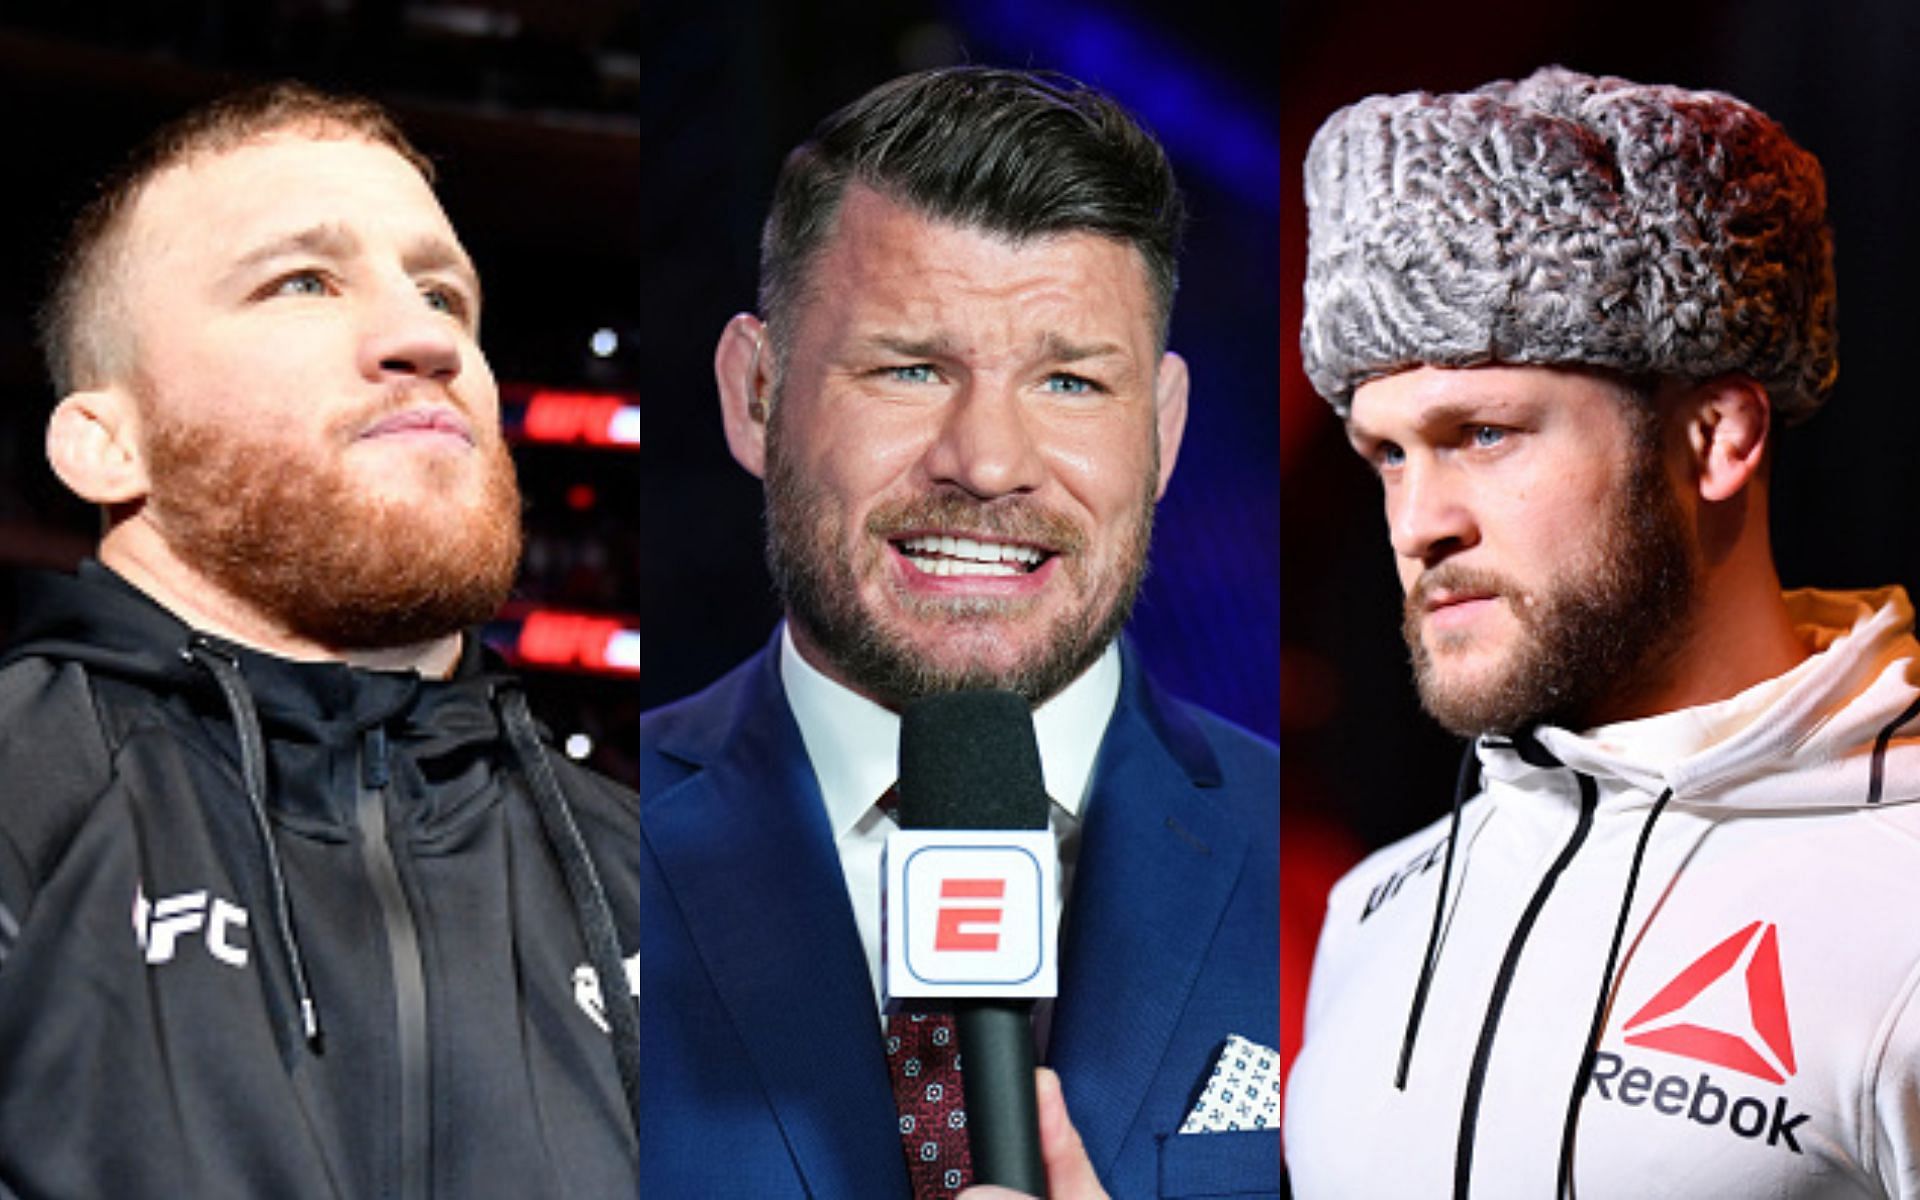 Justin Gaethje (left), Michael Bisping (middle), Rafael Fiziev (right)